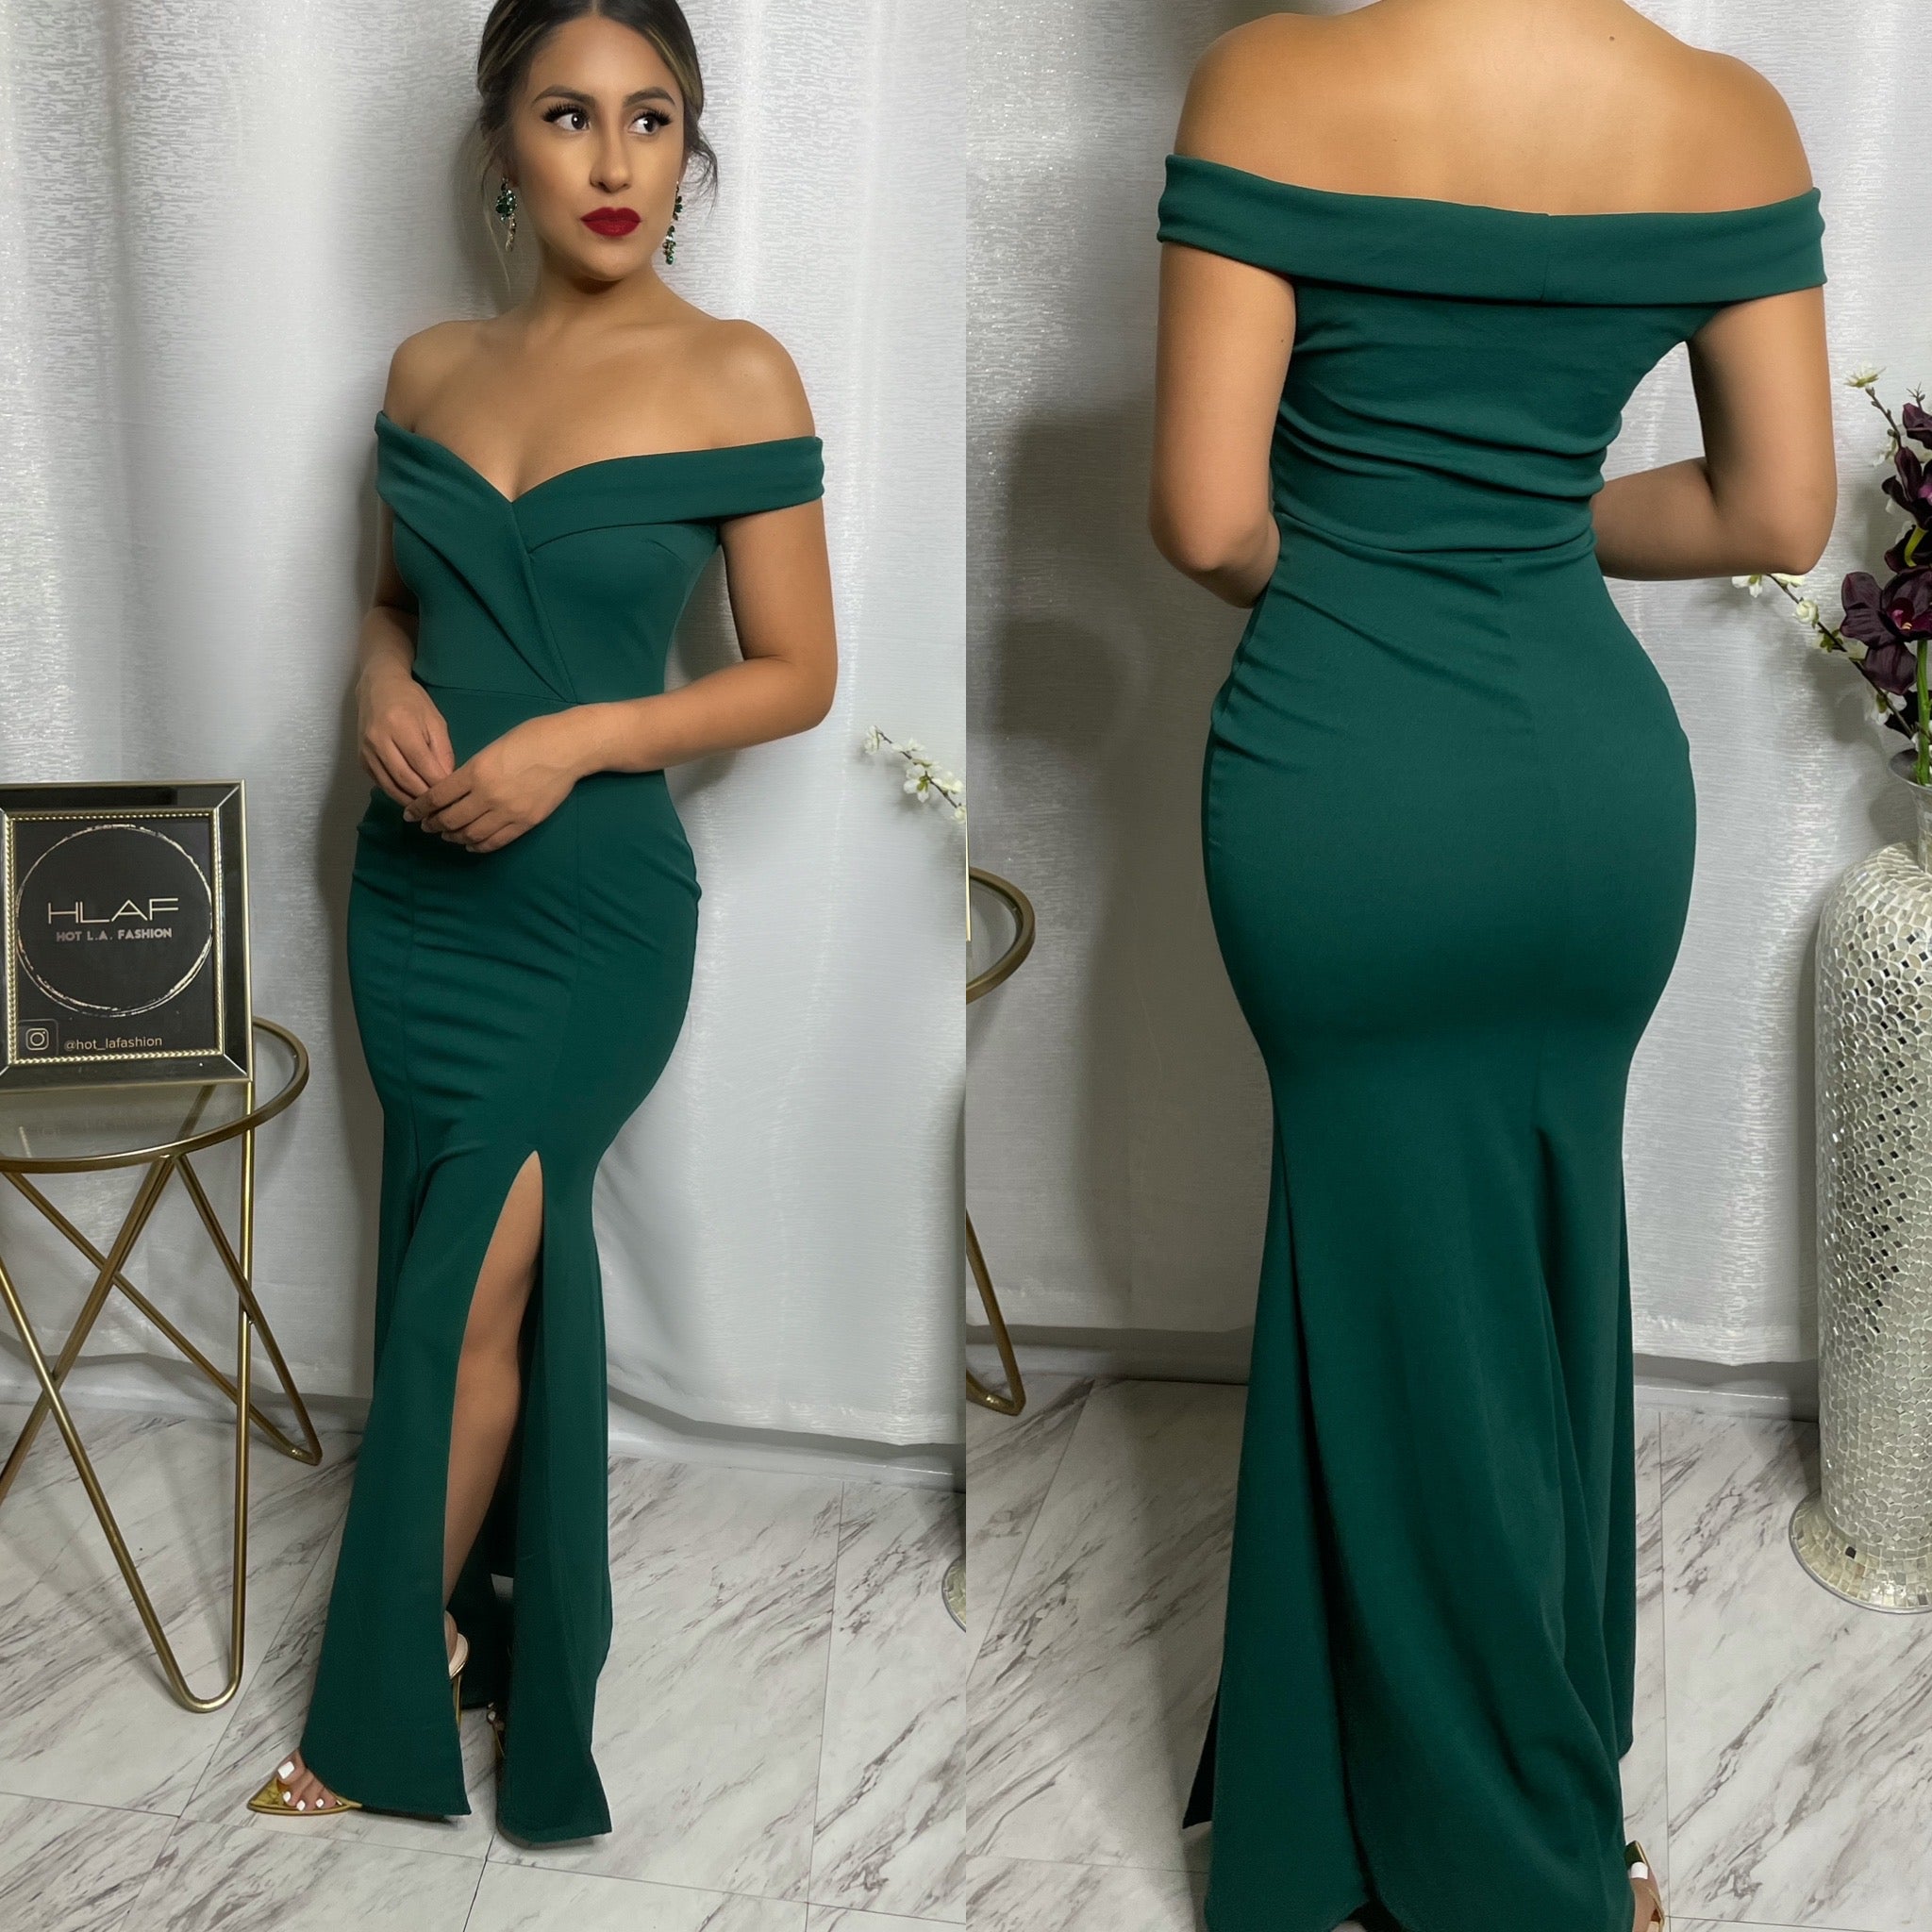 Upscale City Girl Gown - Hunter Green